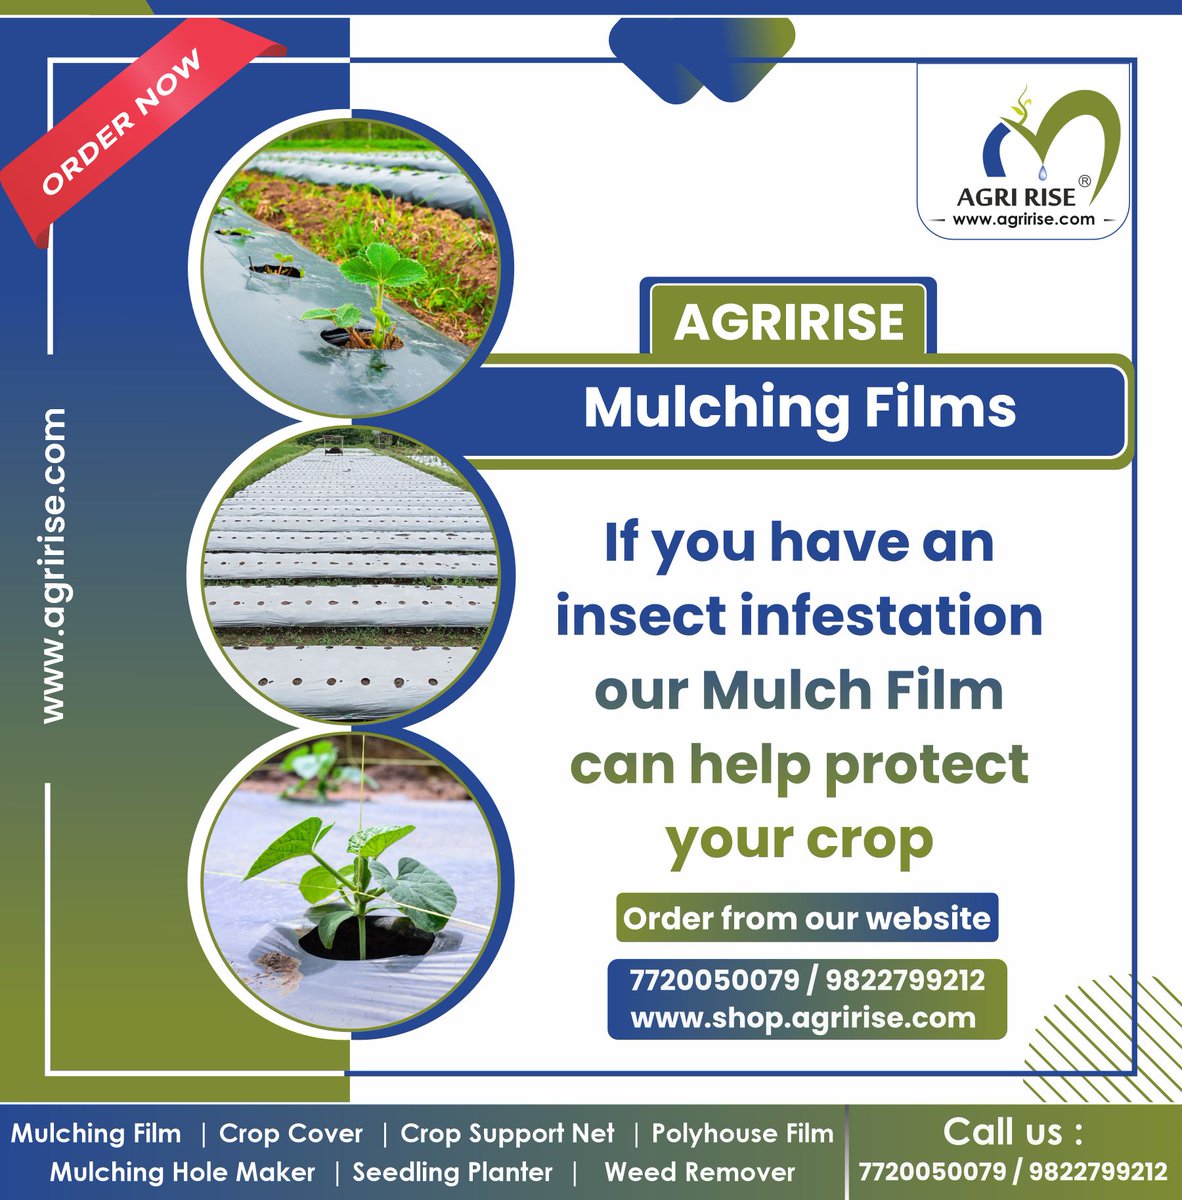 🌱🛒🌾 Order Now for AGRIRISE Mulching Films! 🌱🛒🌾 Combat insect infestations with our Mulch Film! 🐛💪 Call 7720050079/9822799212 📞 #agriculture #farming #mulchfilm #pestcontrol #cropcare #organicfarming #sustainableagriculture #protectyourcrop #innovation #ordernow